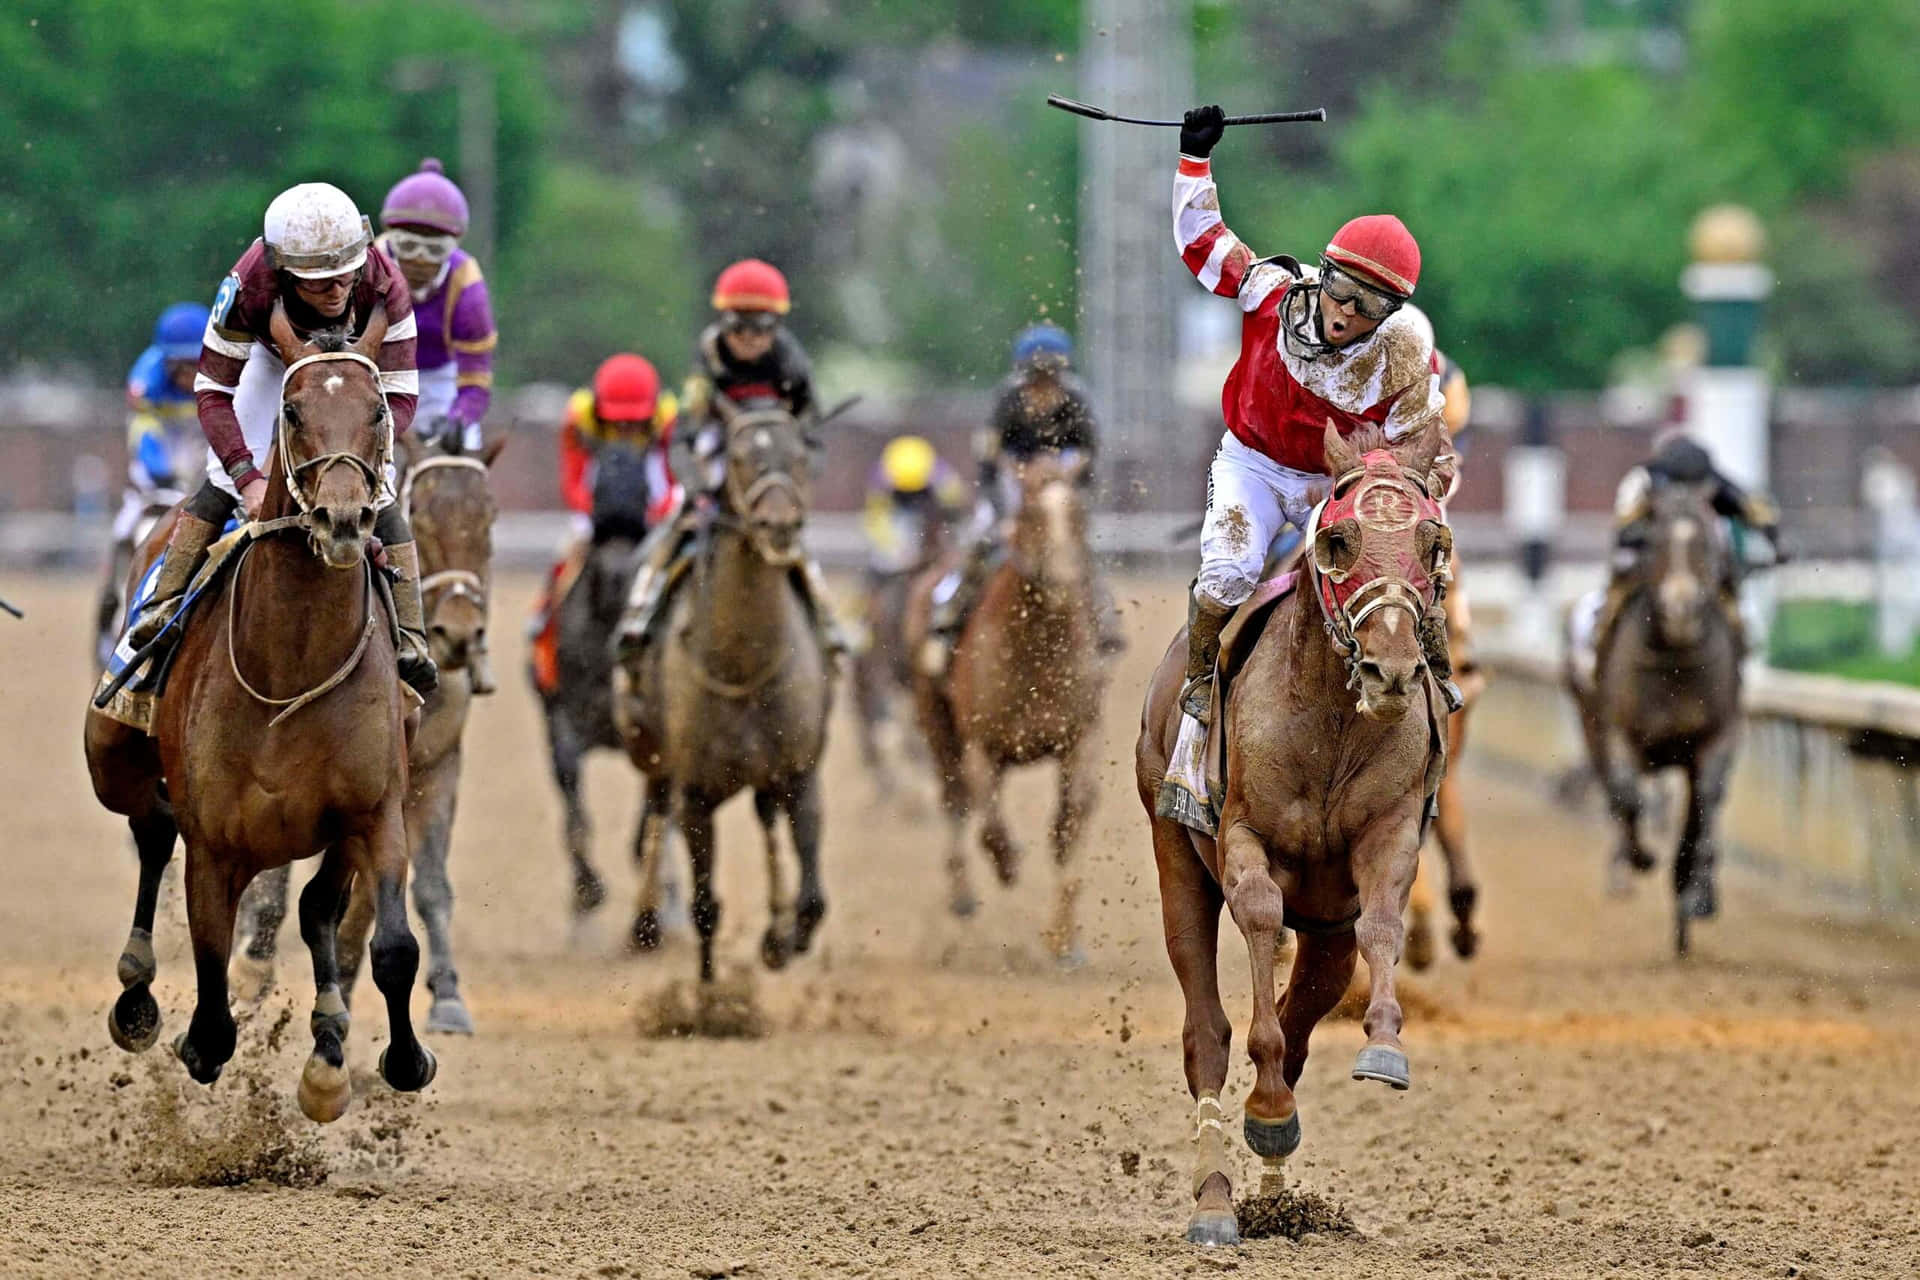 A Group Of Jockeys Are Racing On Horses